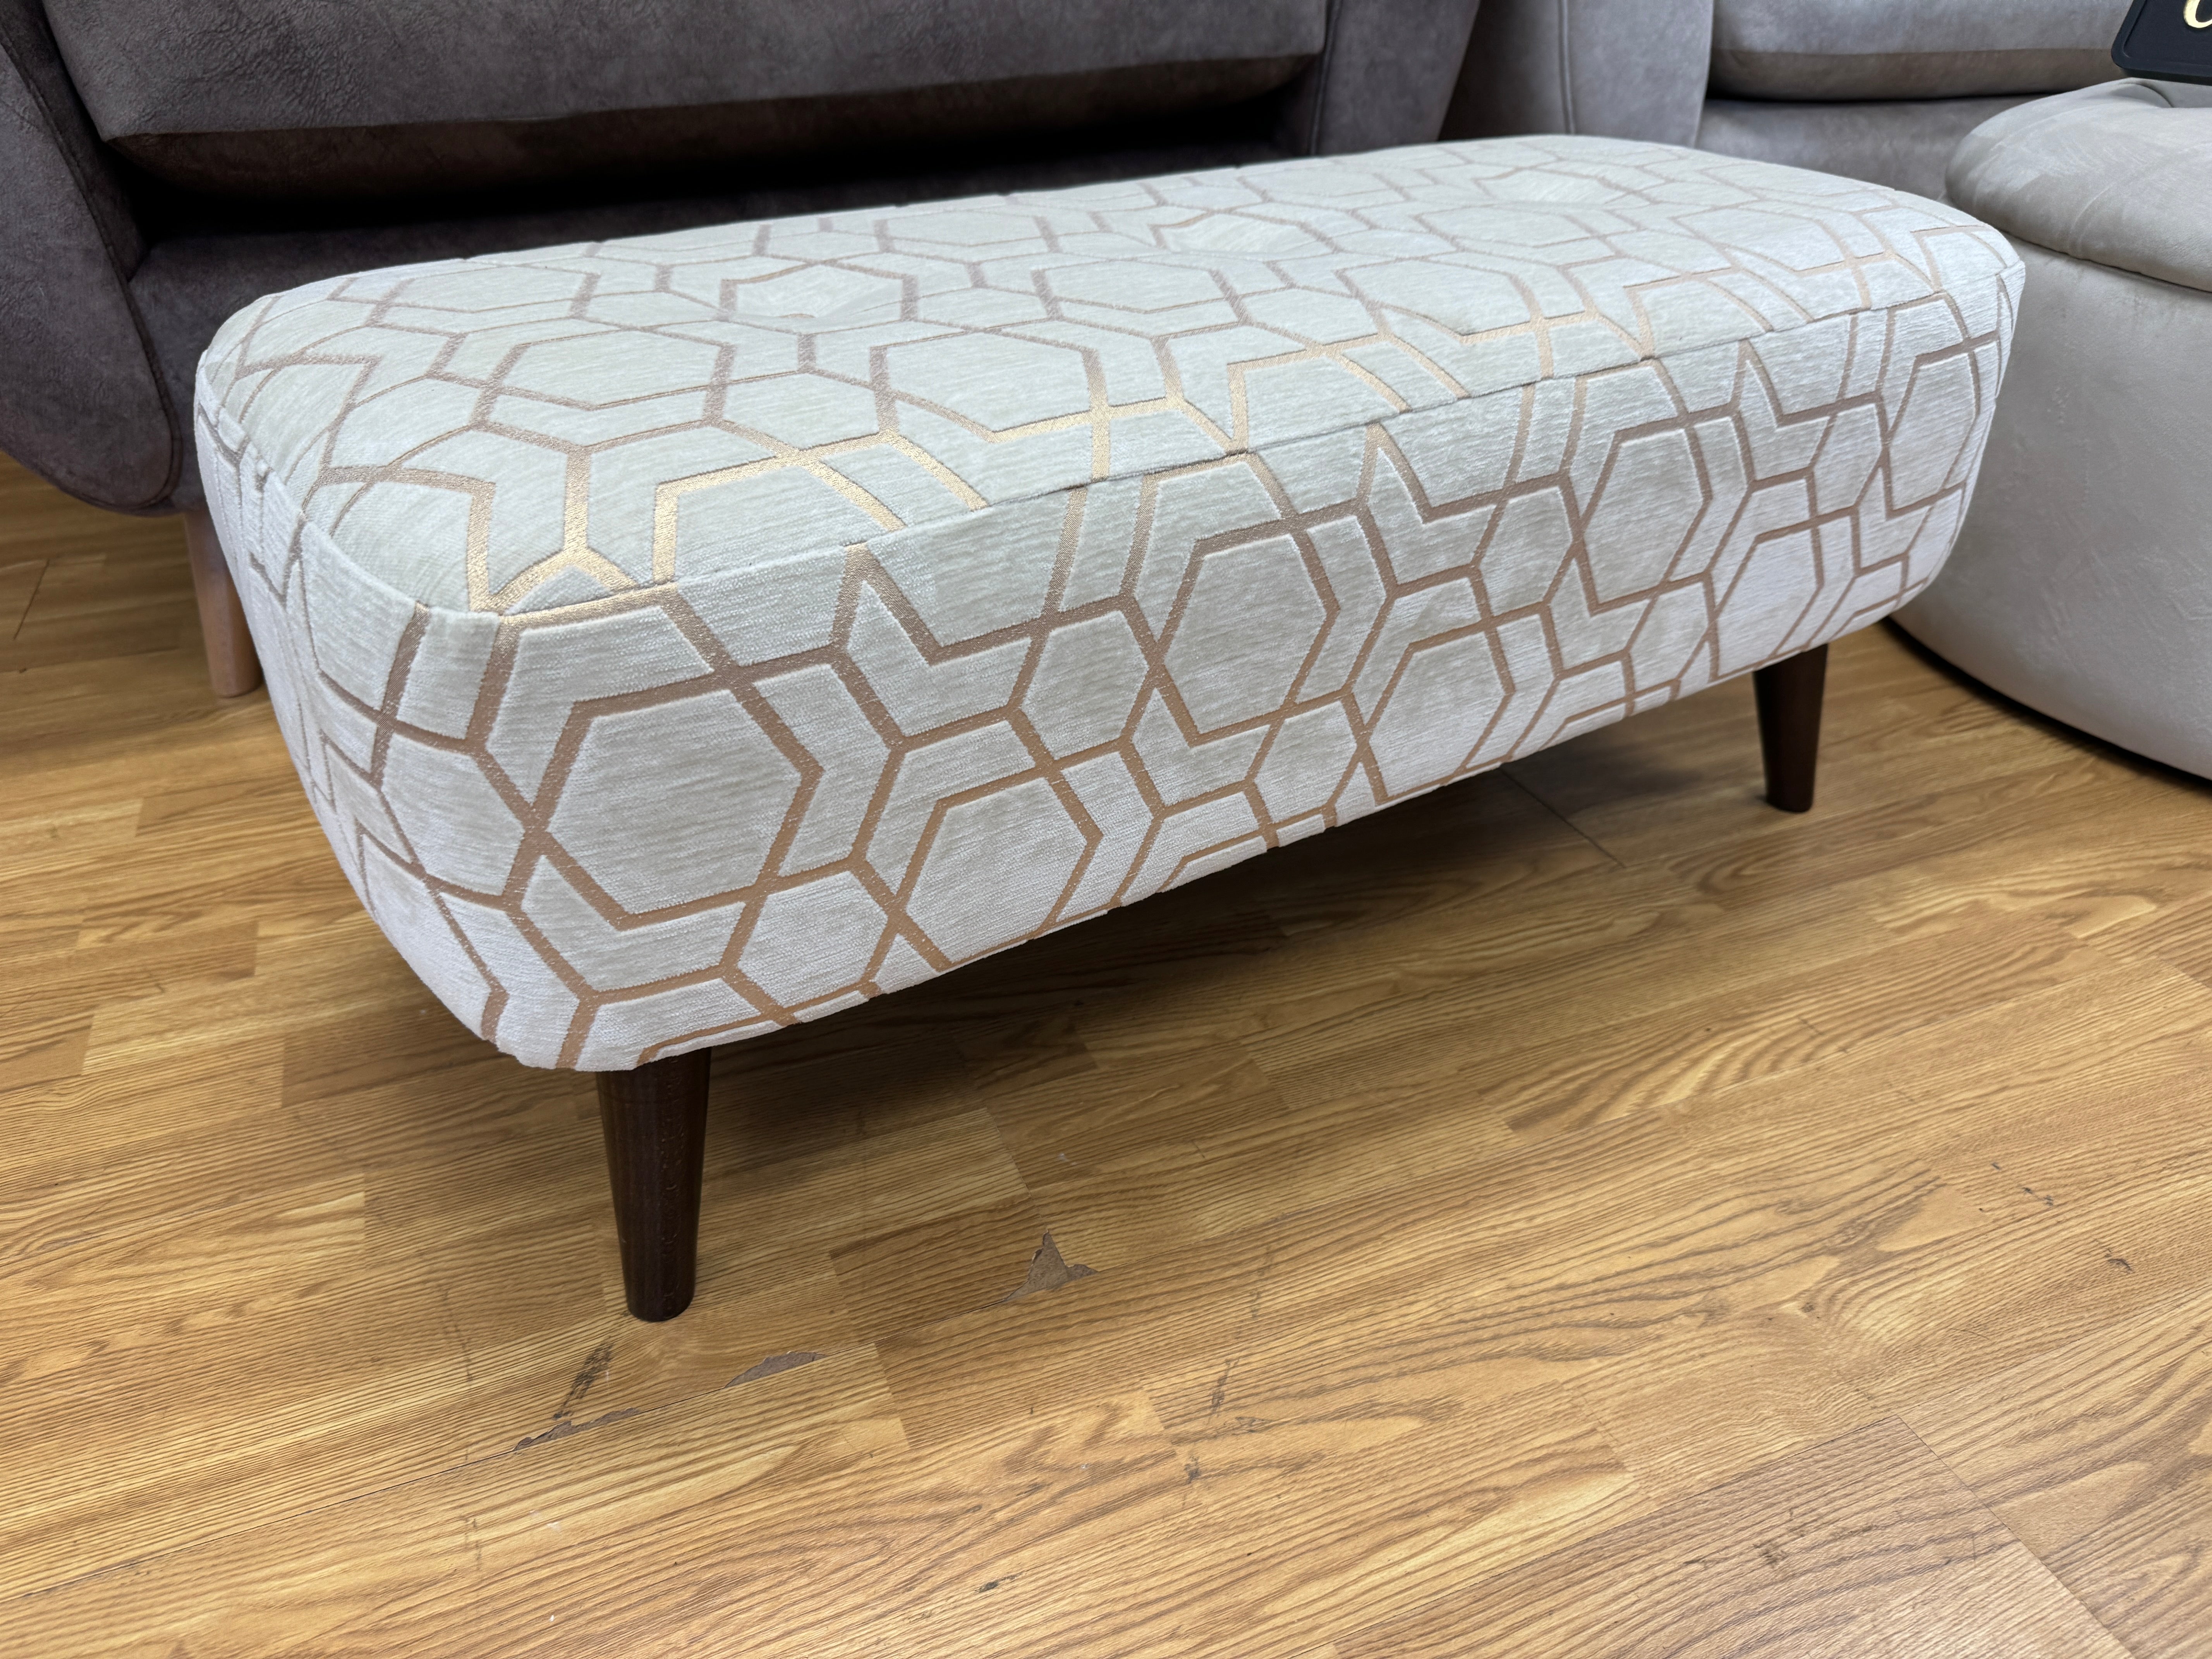 WHITE LABEL LISBON small bench footstool in cream & gold metallic fabric